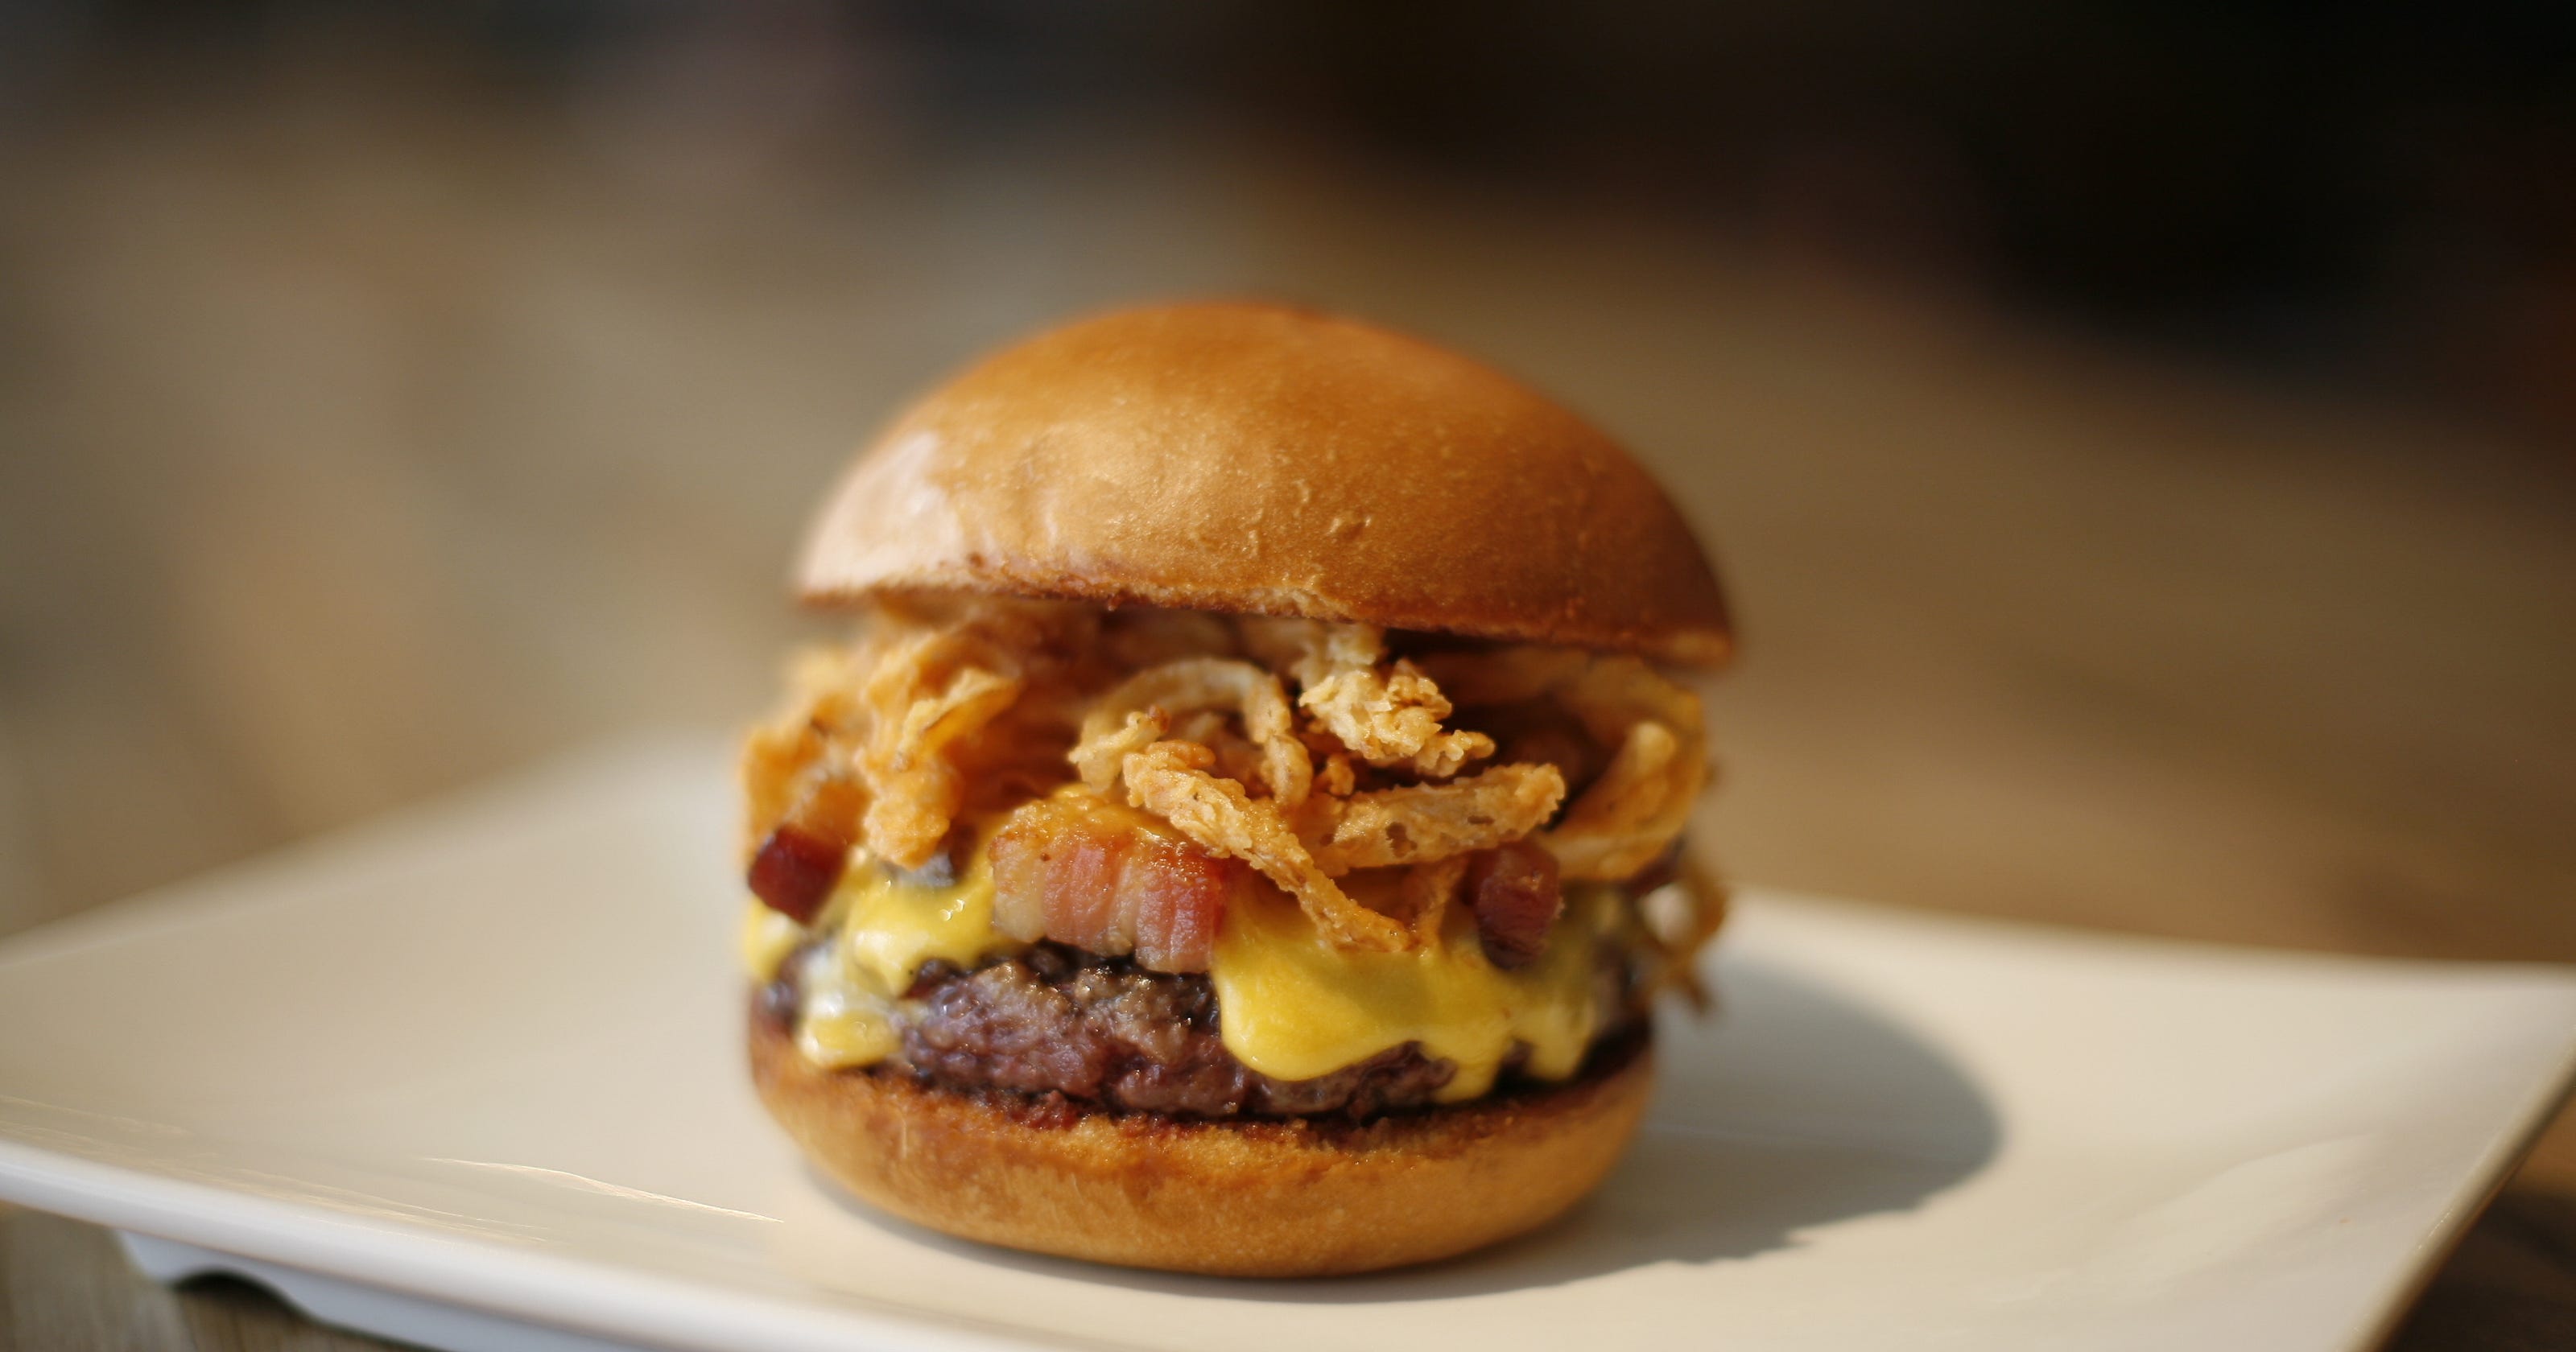 Does Indy own the world's best burger?